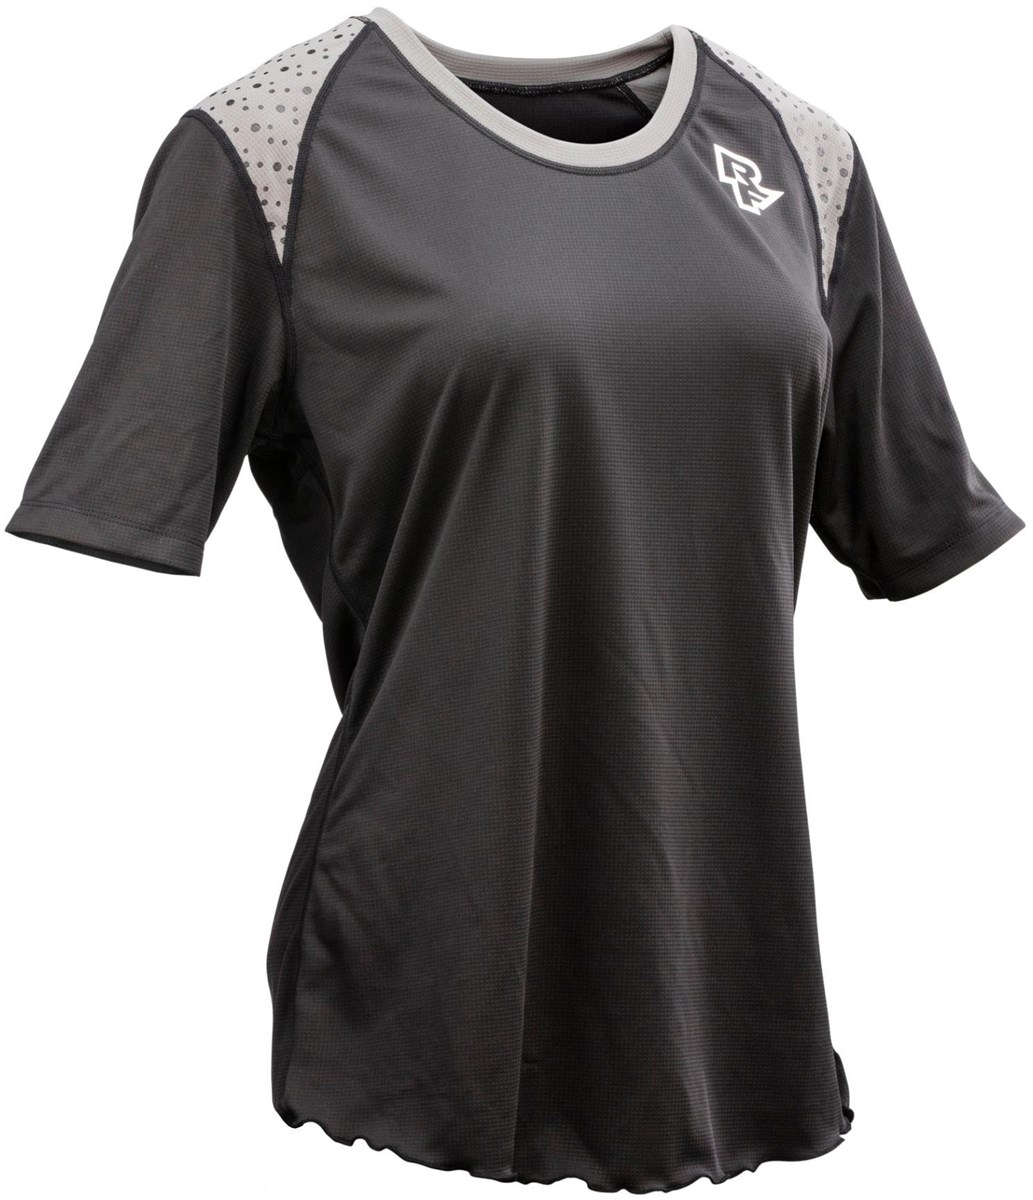 Race Face Indiana Womens Short Sleeve Jersey product image